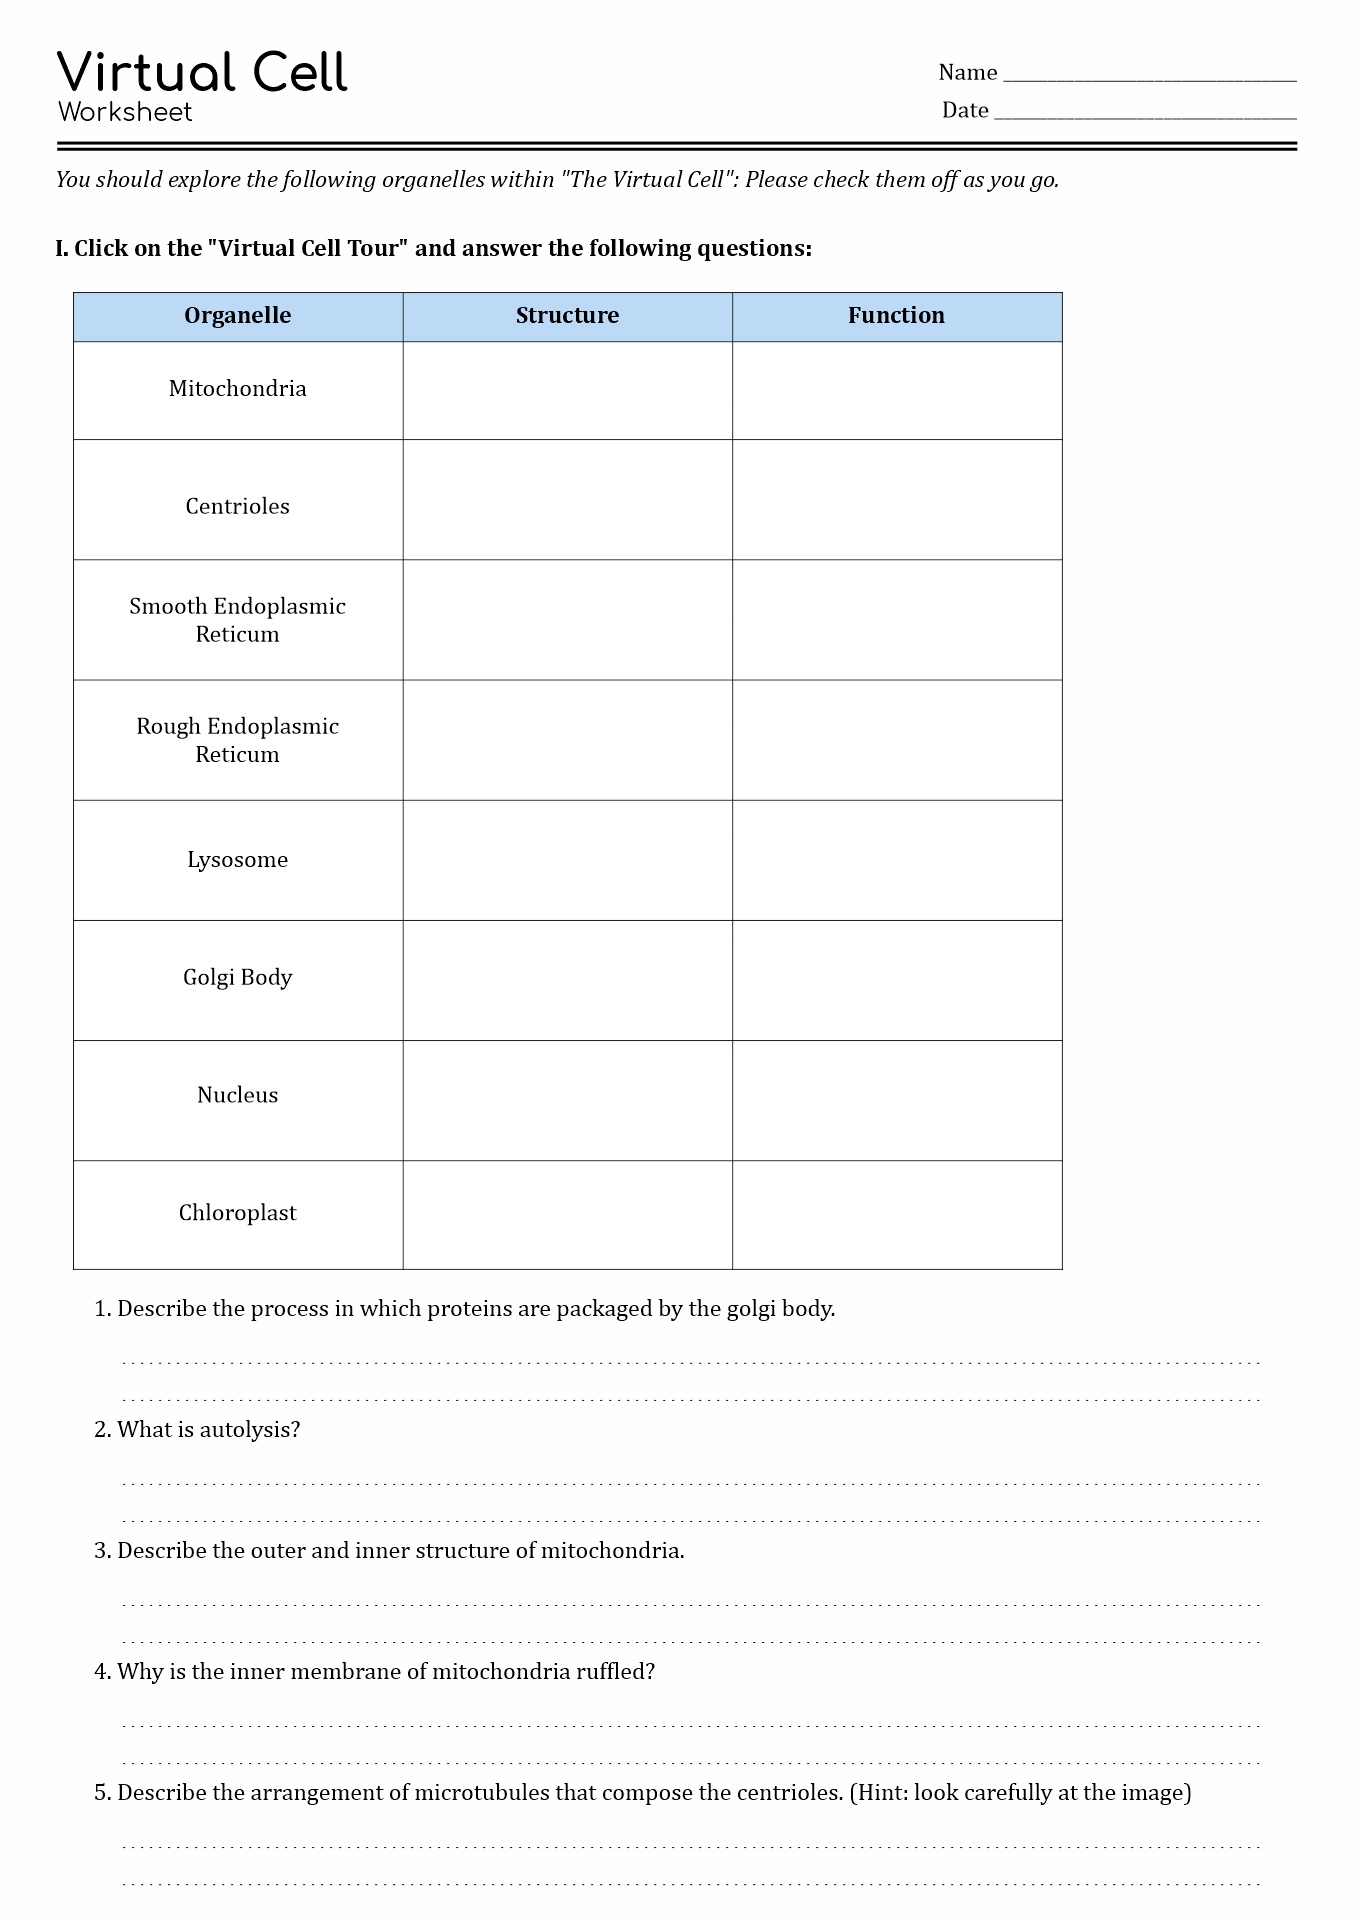 7-best-images-of-mitosis-animal-cells-worksheet-plant-cell-pattern-cell-cycle-worksheet